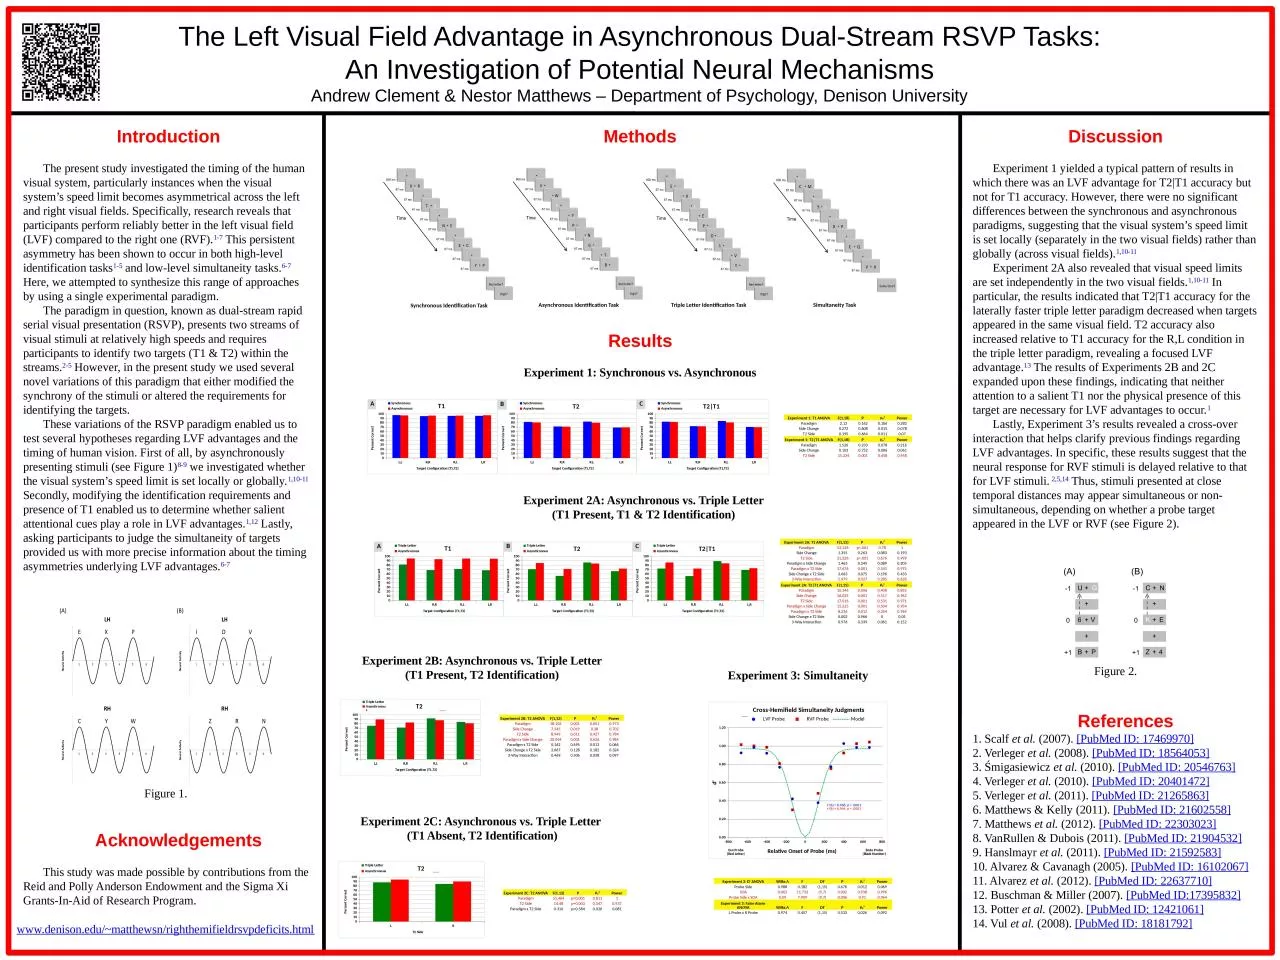 The  Left Visual Field Advantage in Asynchronous Dual-Stream RSVP Tasks: